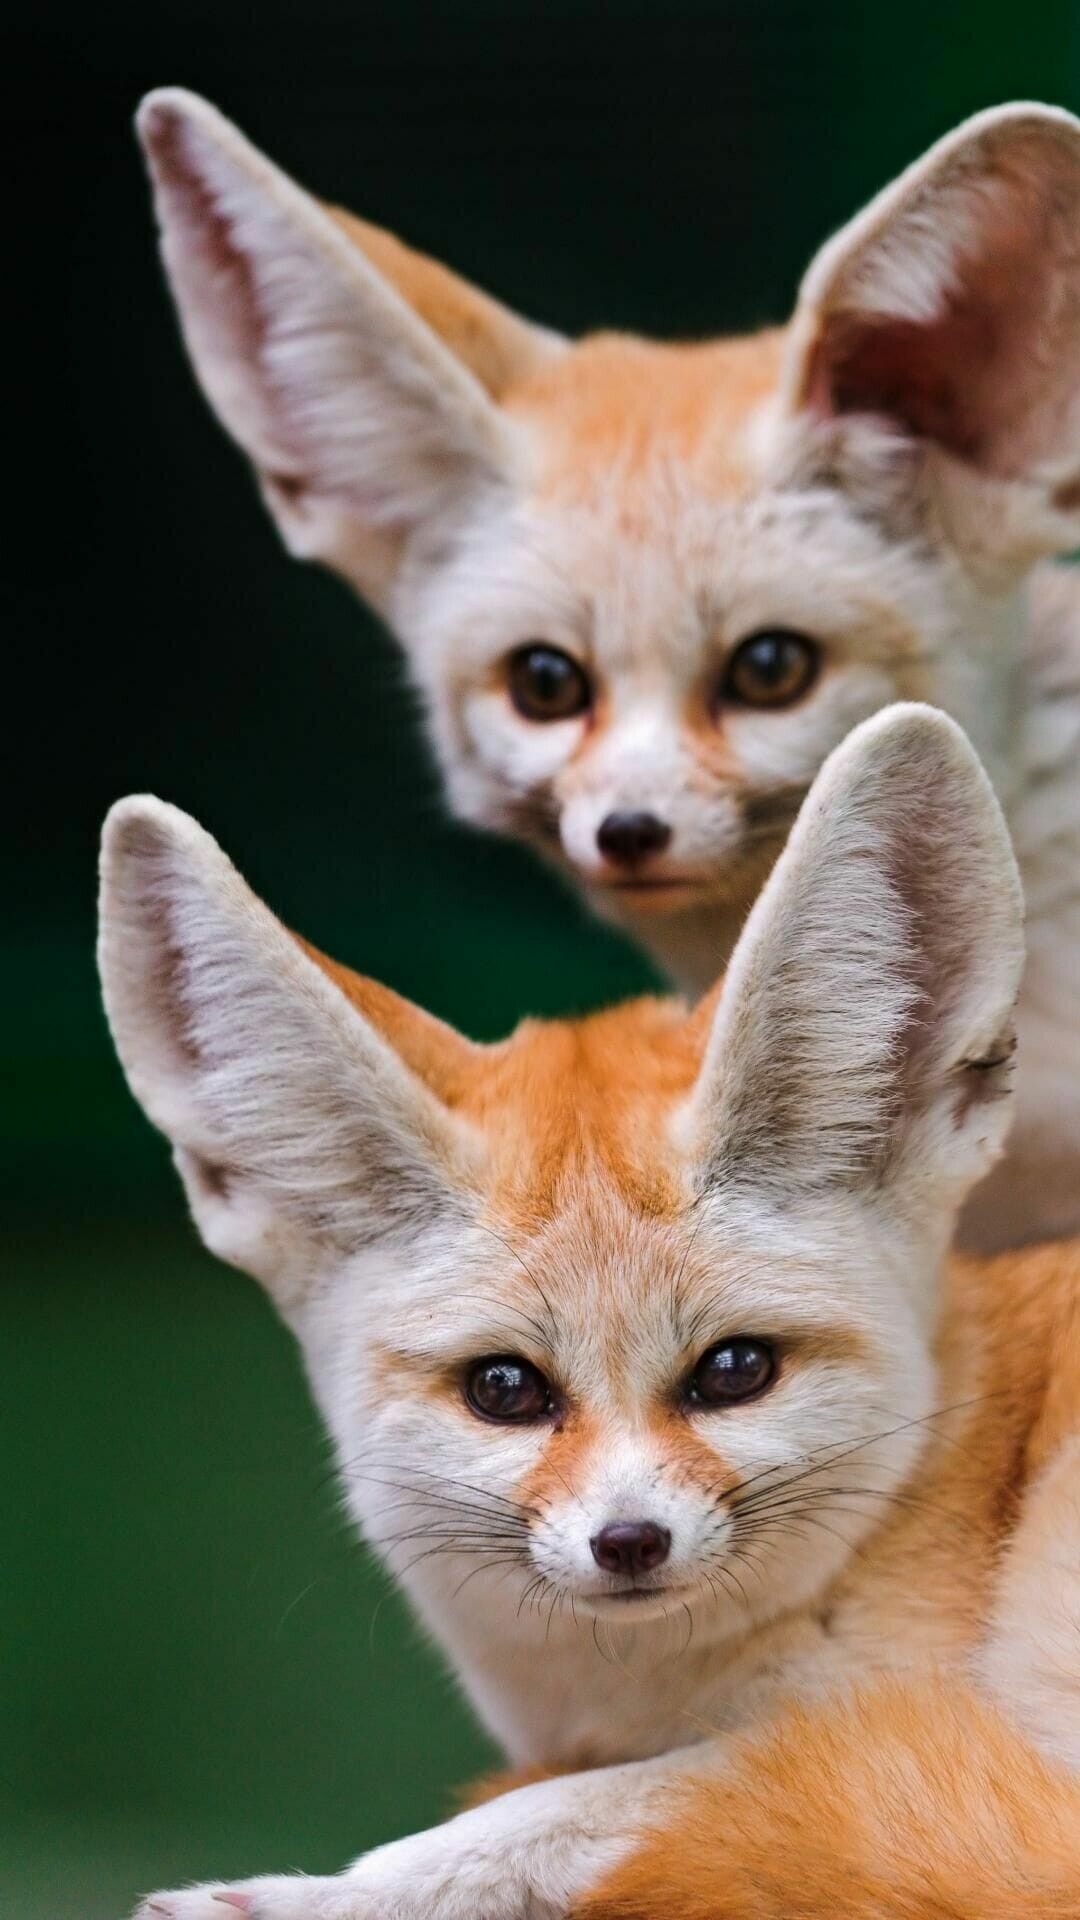 Fox: Fennecs, Highly social animals, living together in family groups. 1080x1920 Full HD Wallpaper.